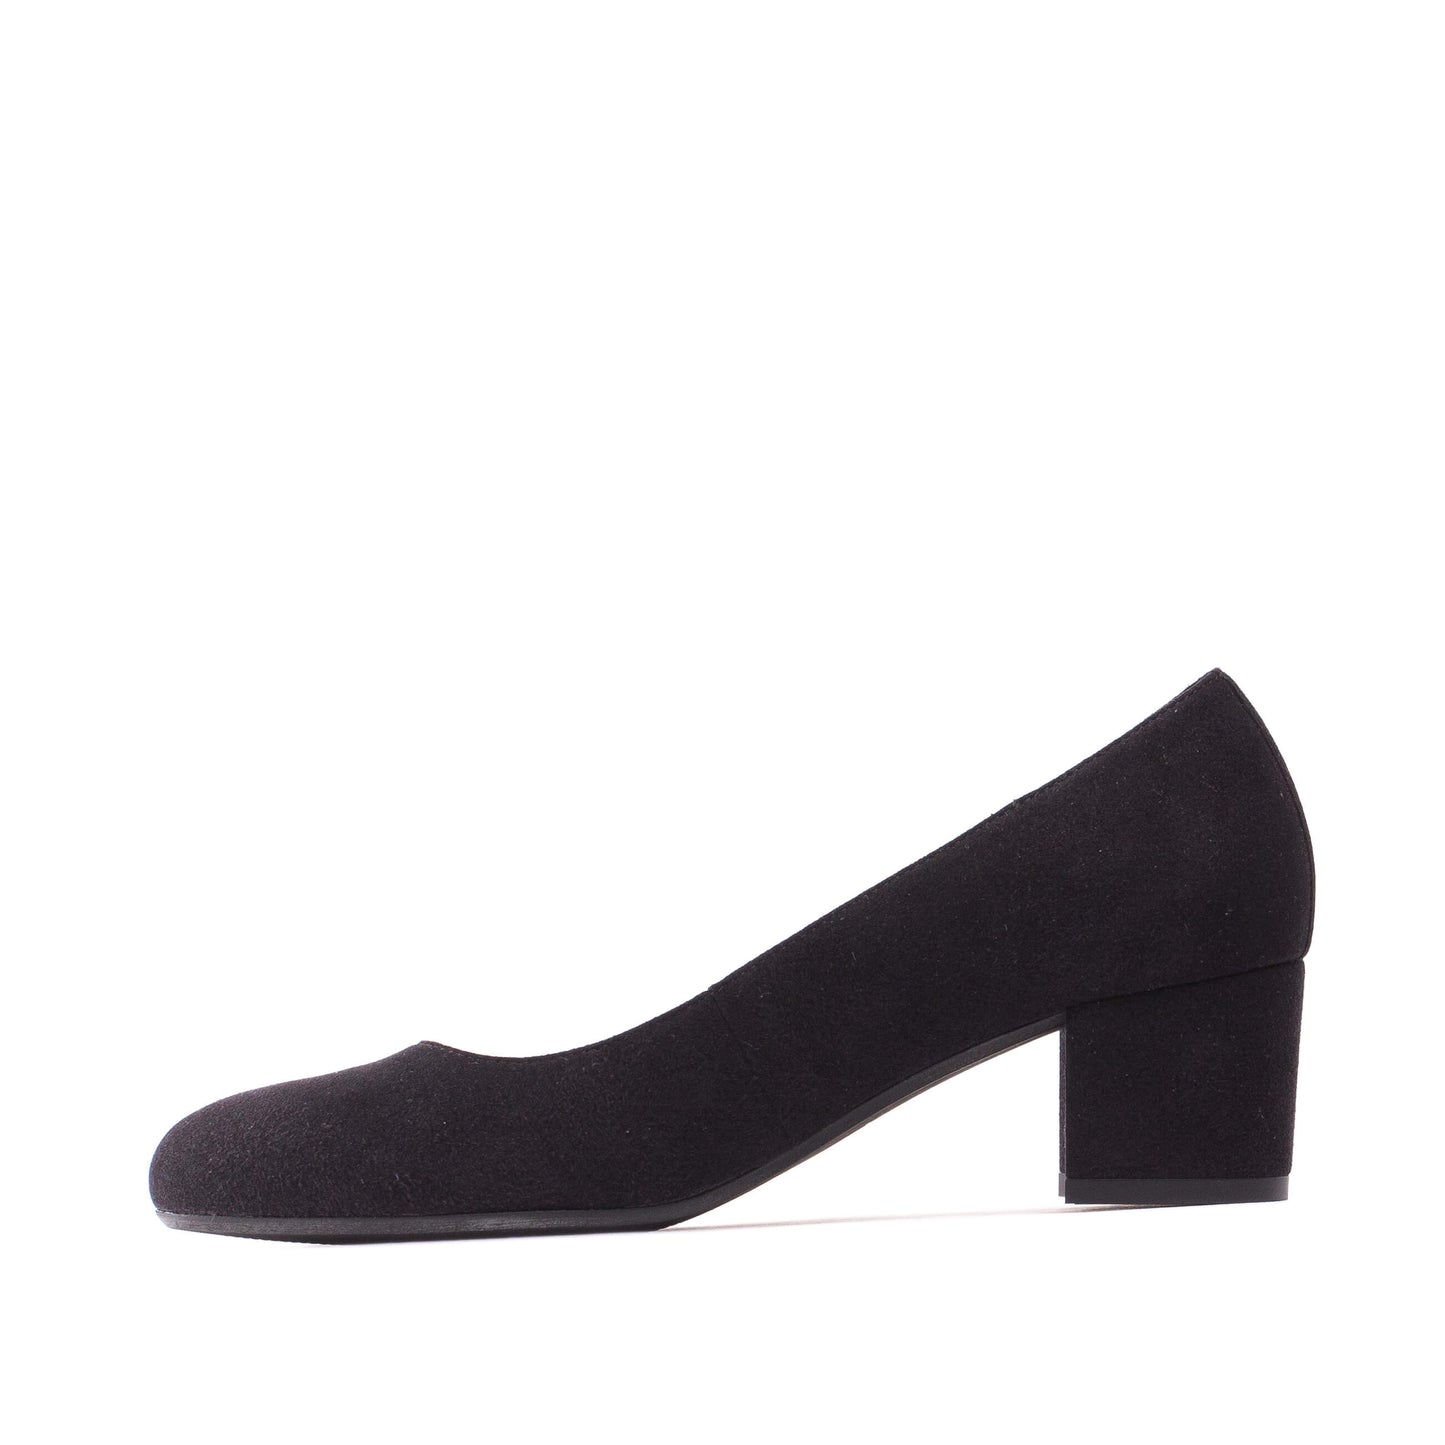 Lina - Block heel shoes made with microfiber